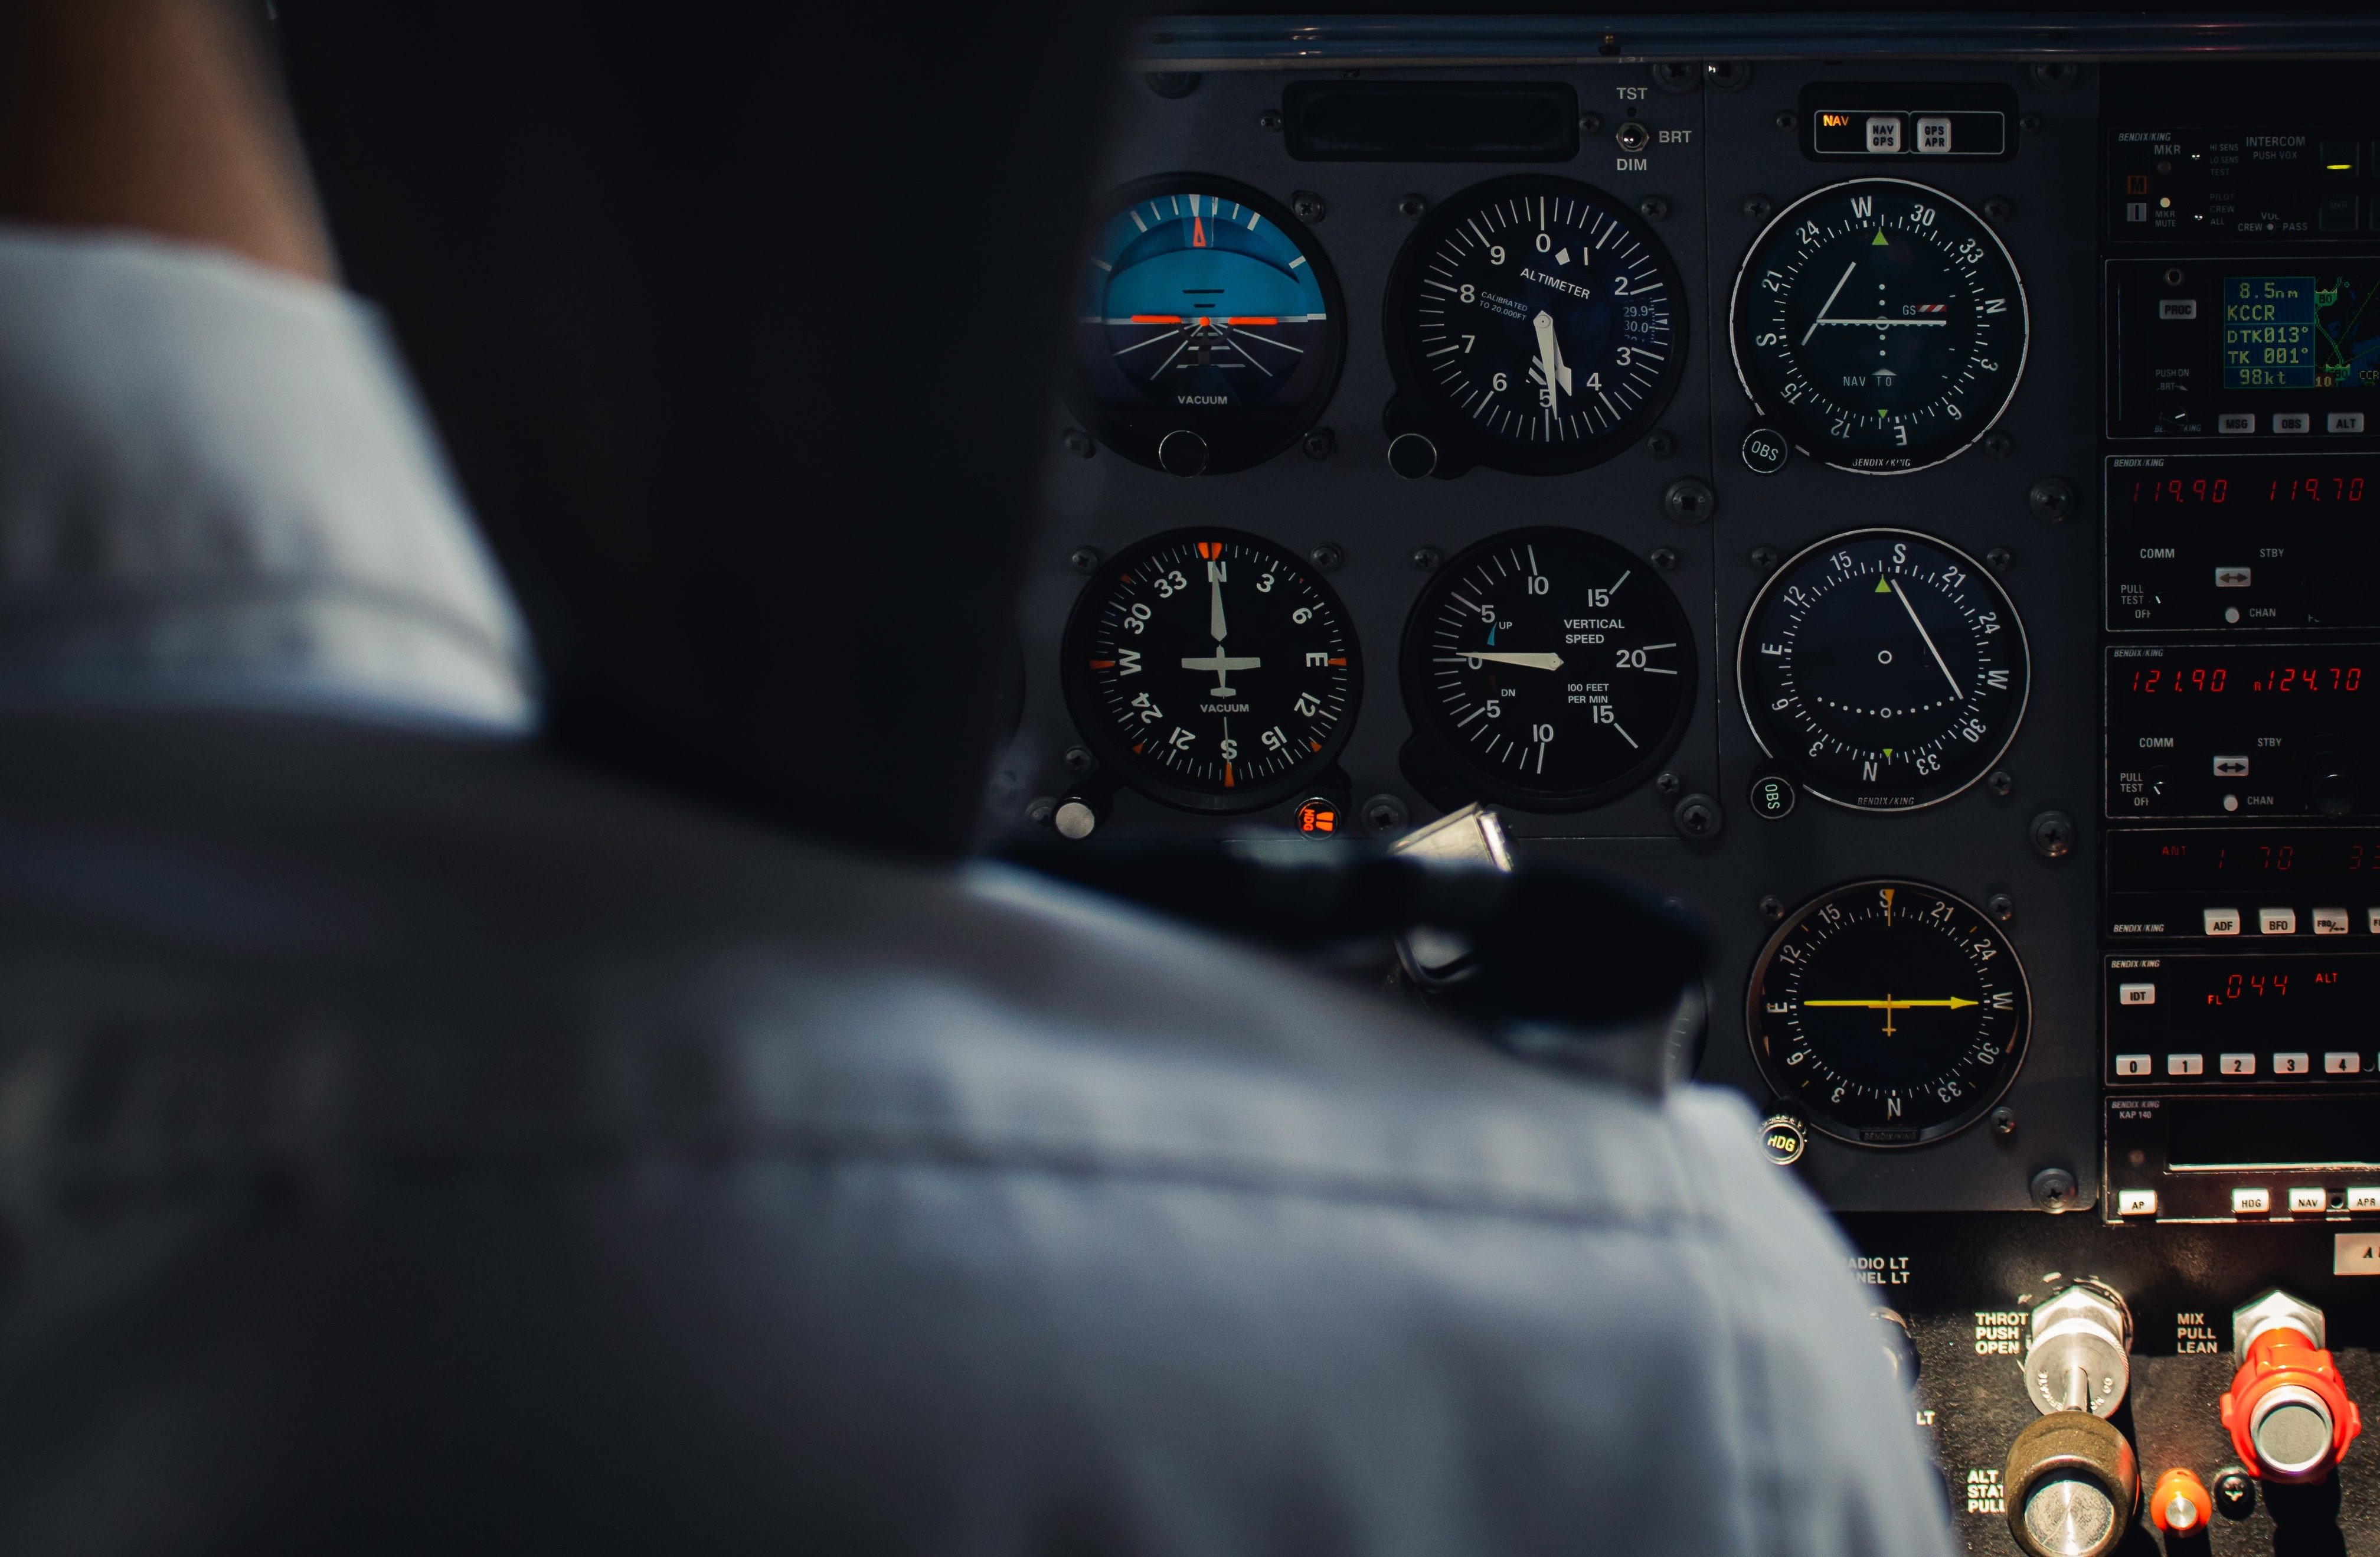 Traditional six-pack instrument panel in front of the pilot in command 